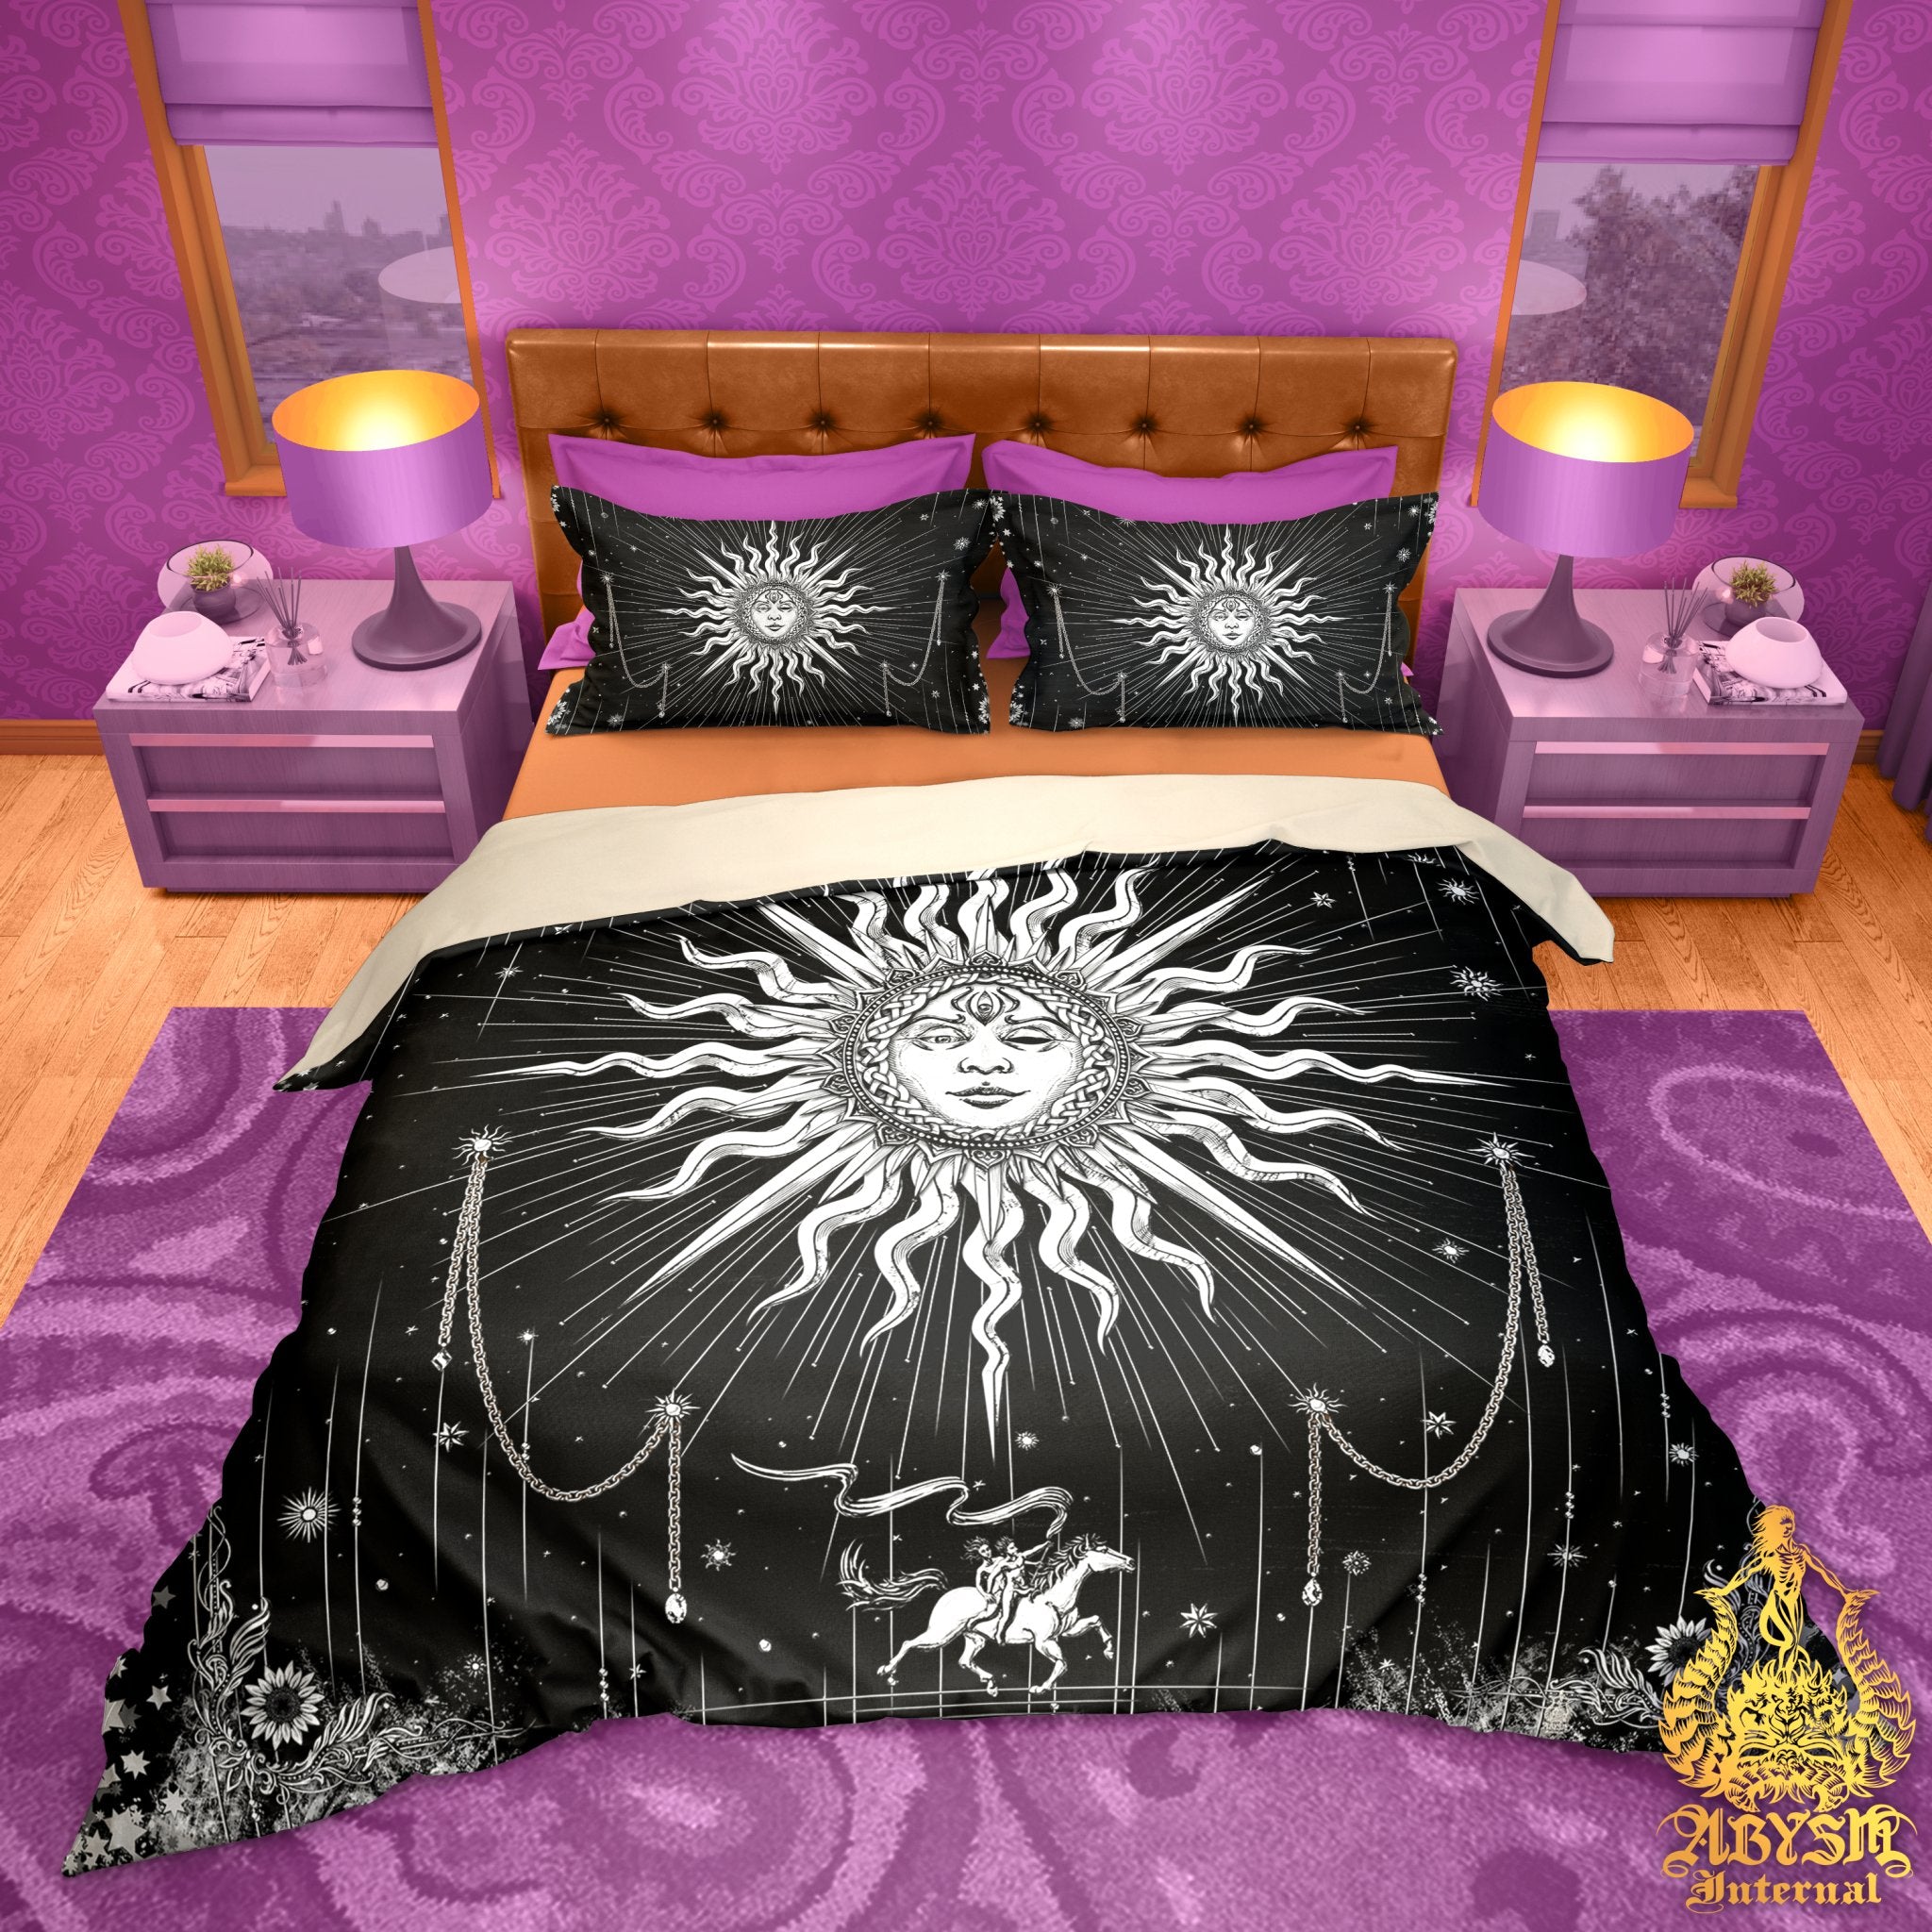 Sun Duvet Cover, Bed Covering, Boho Comforter, Indie Bedroom Decor King, Queen & Twin Bedding Set - Esoteric Tarot Arcana Art, Paper White and 6 Colors - Abysm Internal